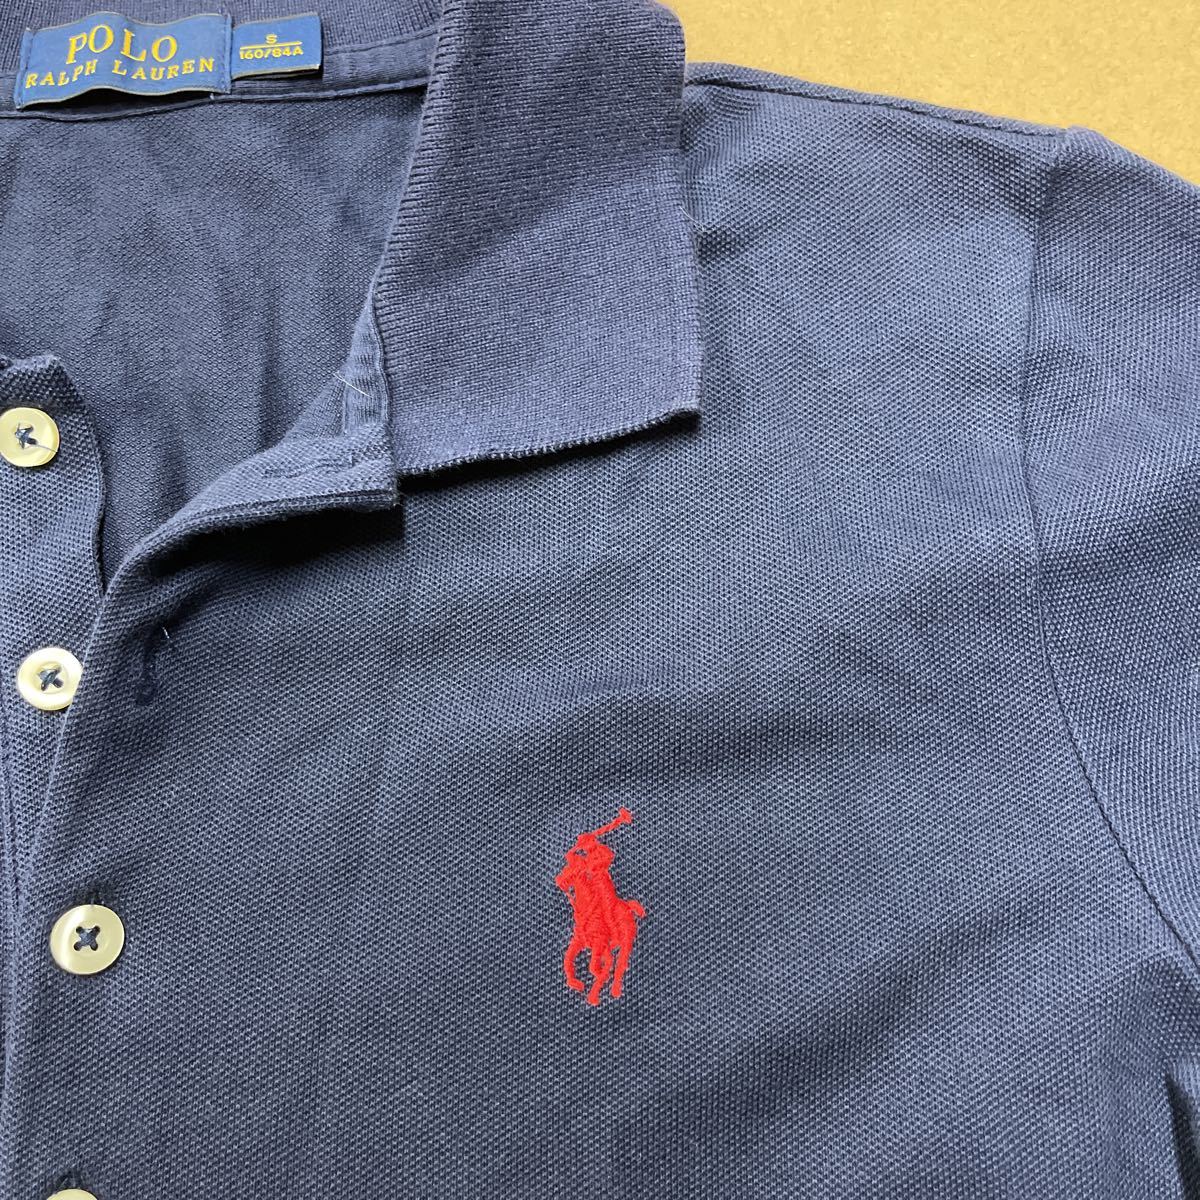 POLO RALPH LAUREN Polo Ralph Lauren lady's polo-shirt with short sleeves navy navy blue color S size beautiful goods 